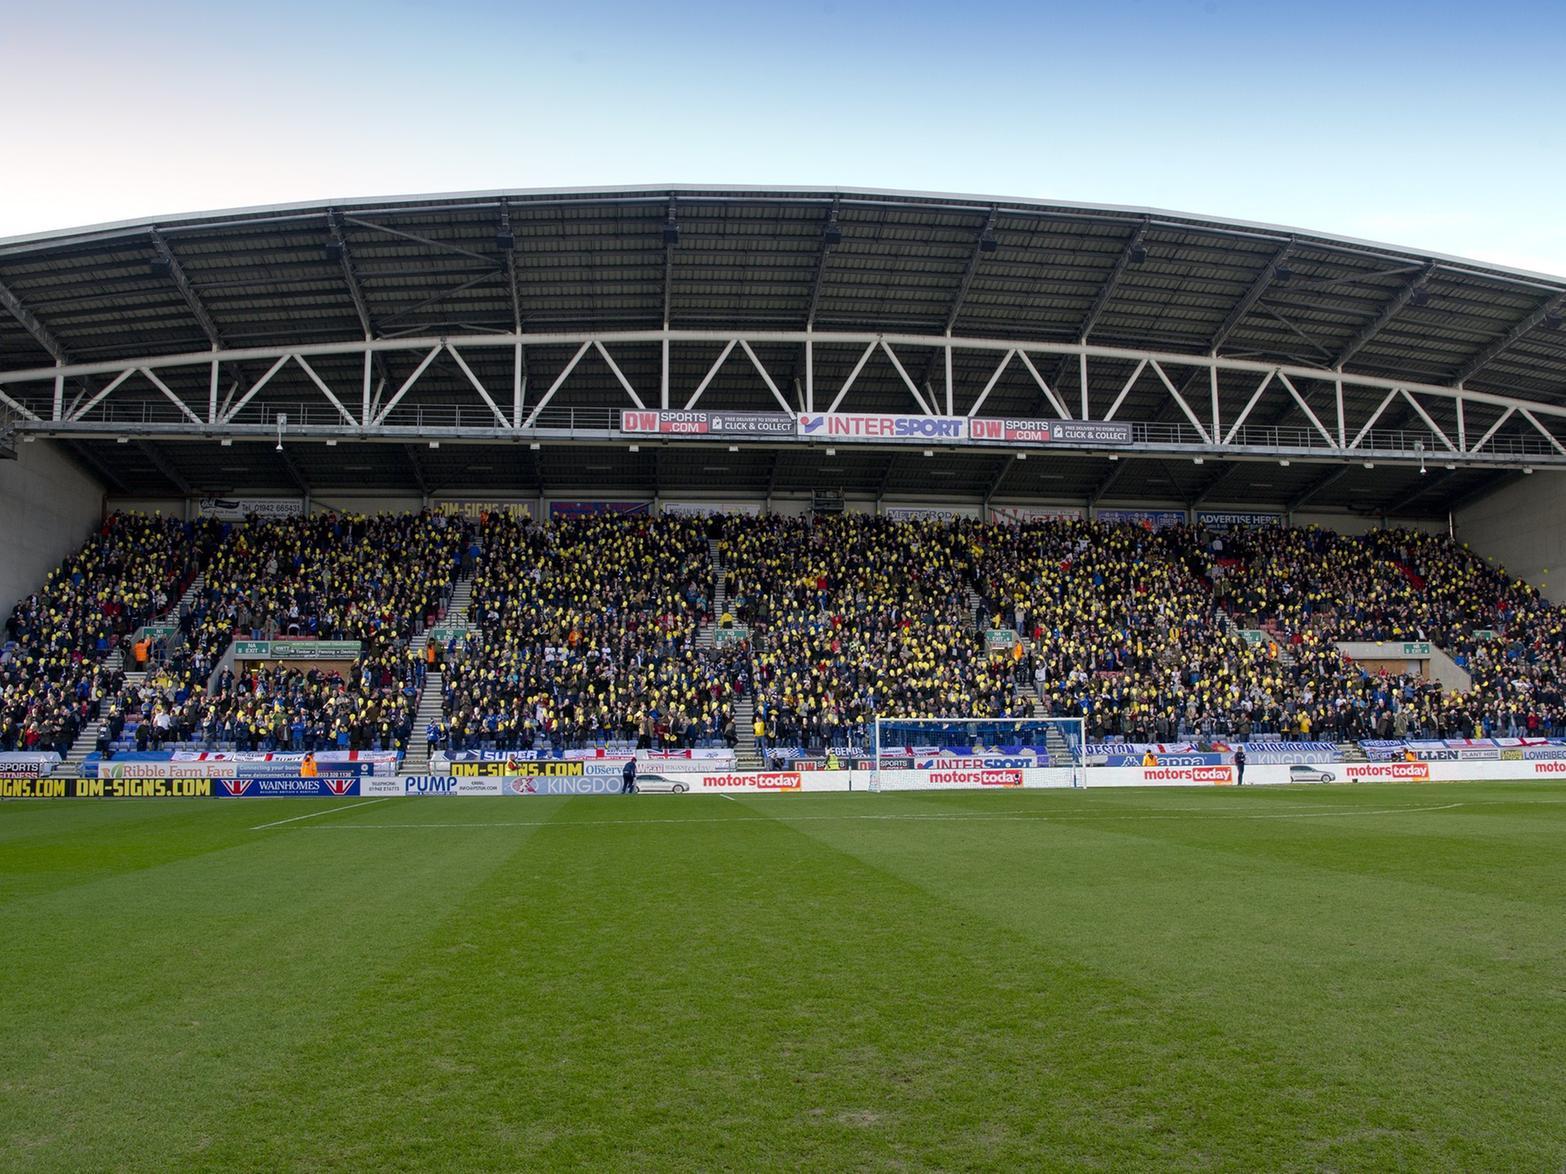 It was a full away end when PNE visited Wigan in February 2017